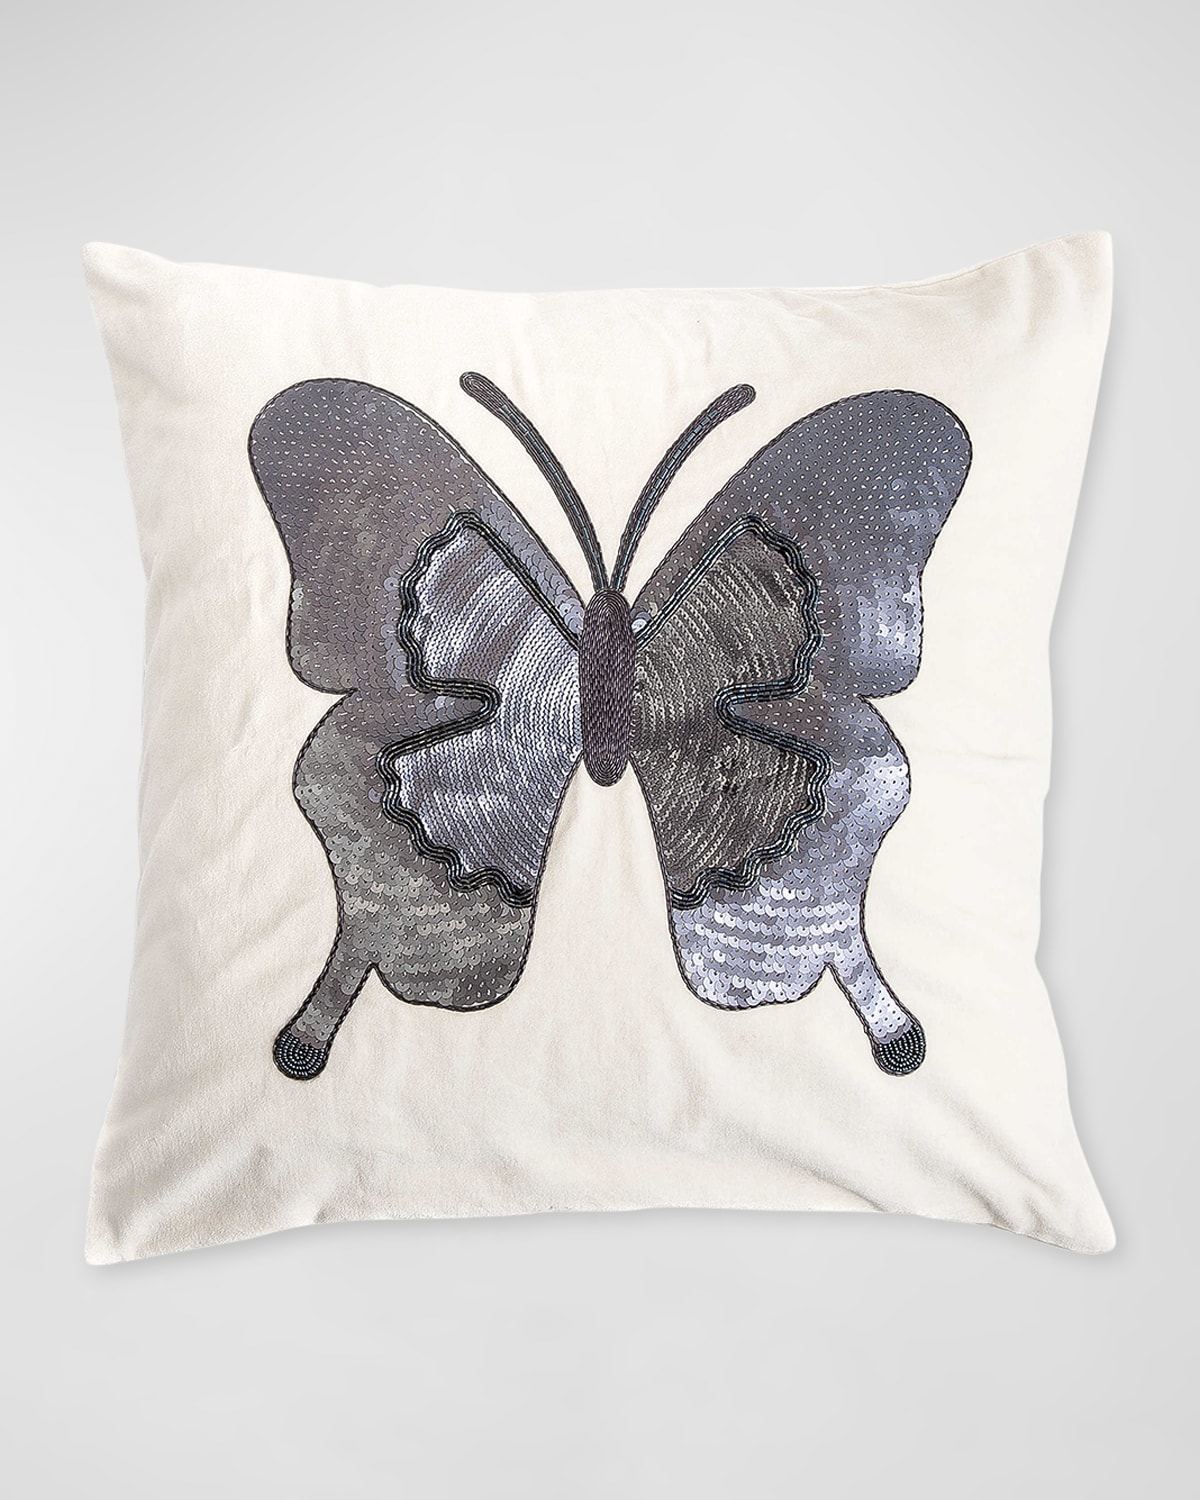 Mackenzie-childs Ivory Butterfly Pillow